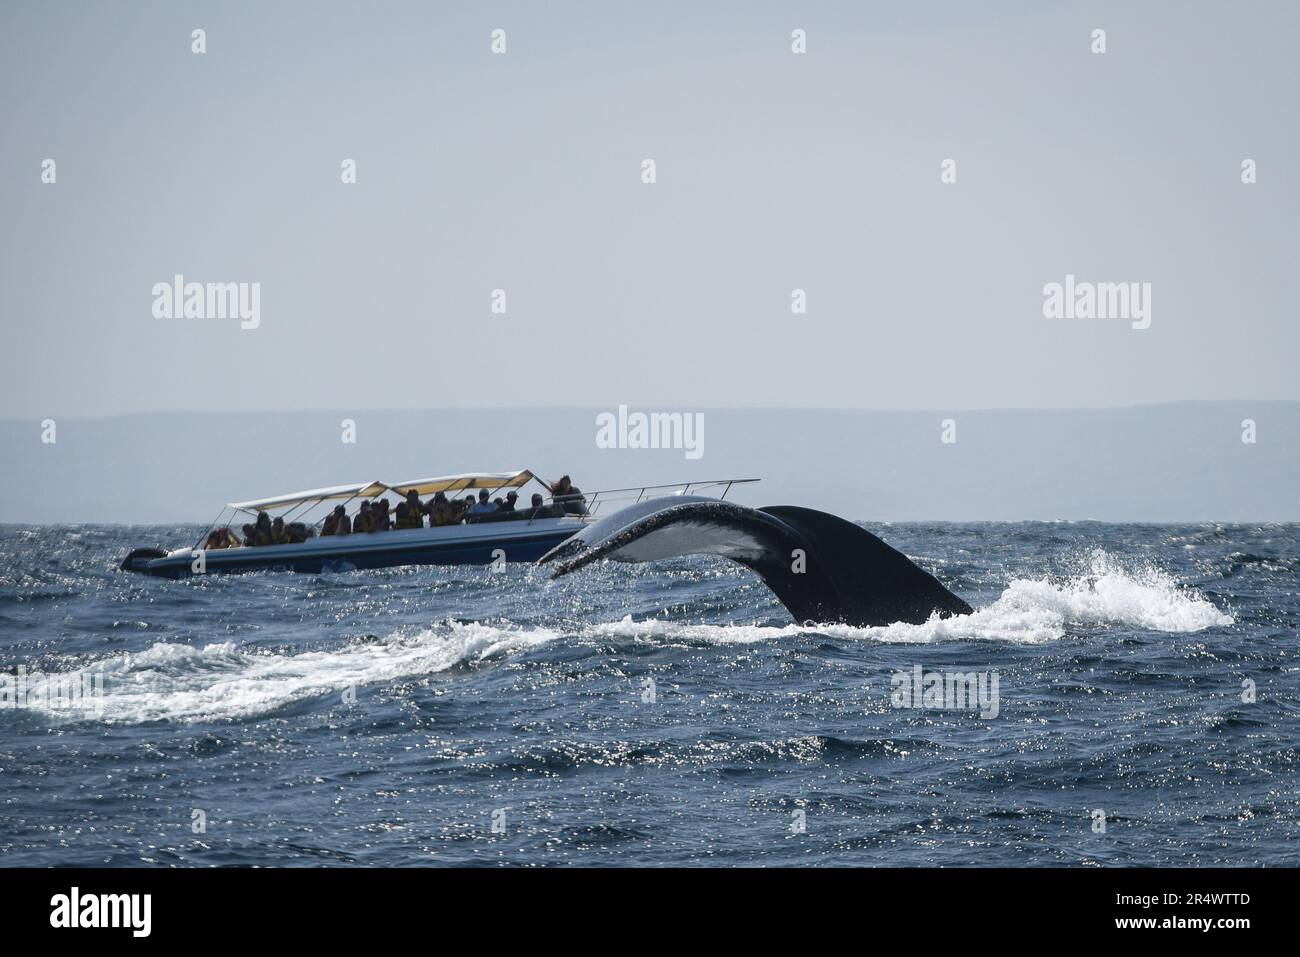 Nicolas Remene / Le Pictorium -  El Nino phenomenon on the north coast of Peru  -  21/10/2018  -  Peru / Piura / ? Mancora / Talara ?  -  Whales at Los Organos in the Talara region, on Peru's northwest coast, October 21, 2018. Whales and other cetaceans are vulnerable species because they are sensitive to threats linked to human activities and certain natural phenomena such as El Nino.                 Los Organos is one of the fishing villages affected by the El Nino phenomenon.                           ---------------------------------------- El Nino phenomenon on the north coast of Peru Nor Stock Photo